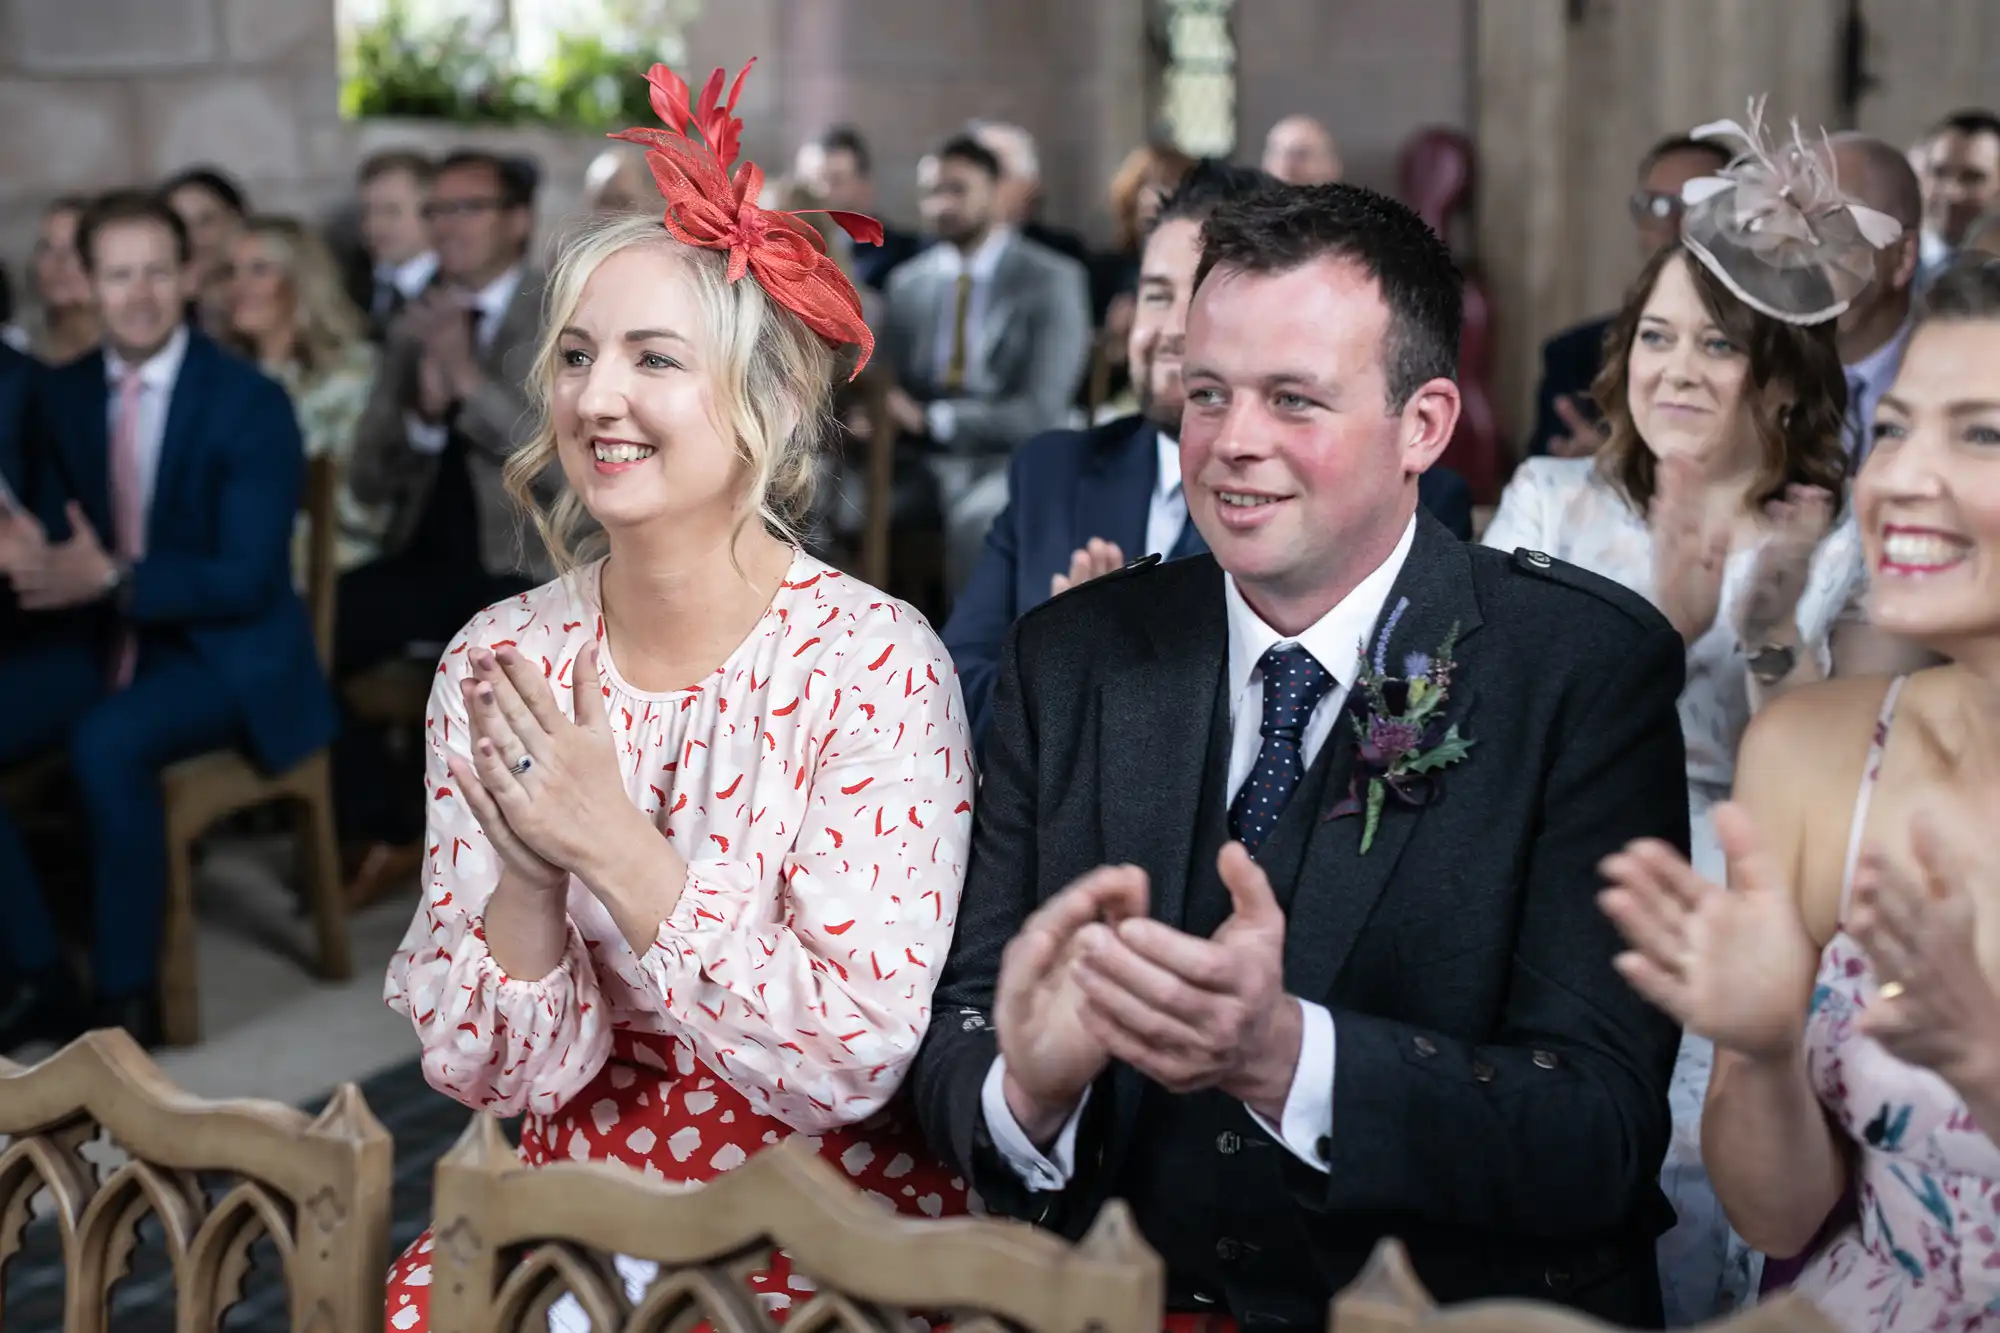 Guests in formal attire clapping at a wedding ceremony, with a woman in a red and white dress and a red hat, and a man in a suit with a flower boutonniere.